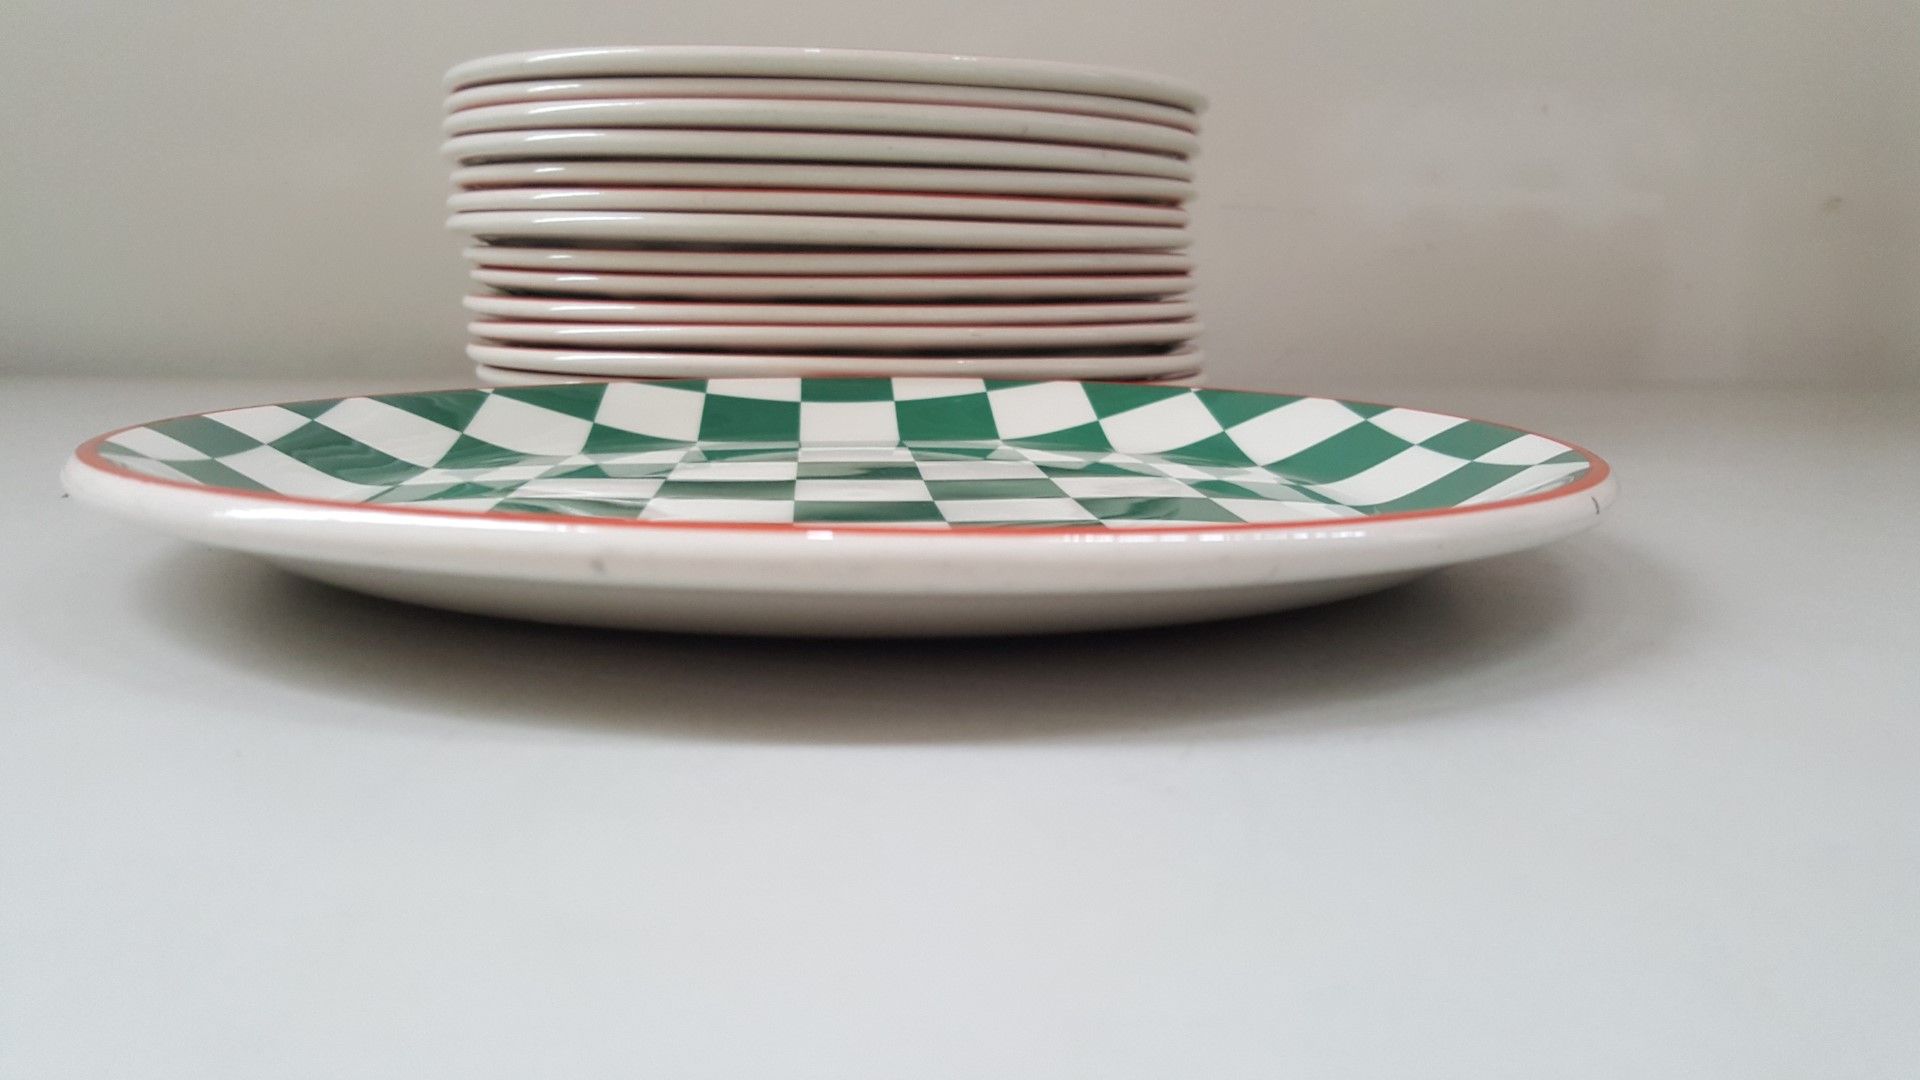 14 x Steelite Plates Checkered Green&White With Red Outline 25CM - Ref CQ278 - Image 4 of 4